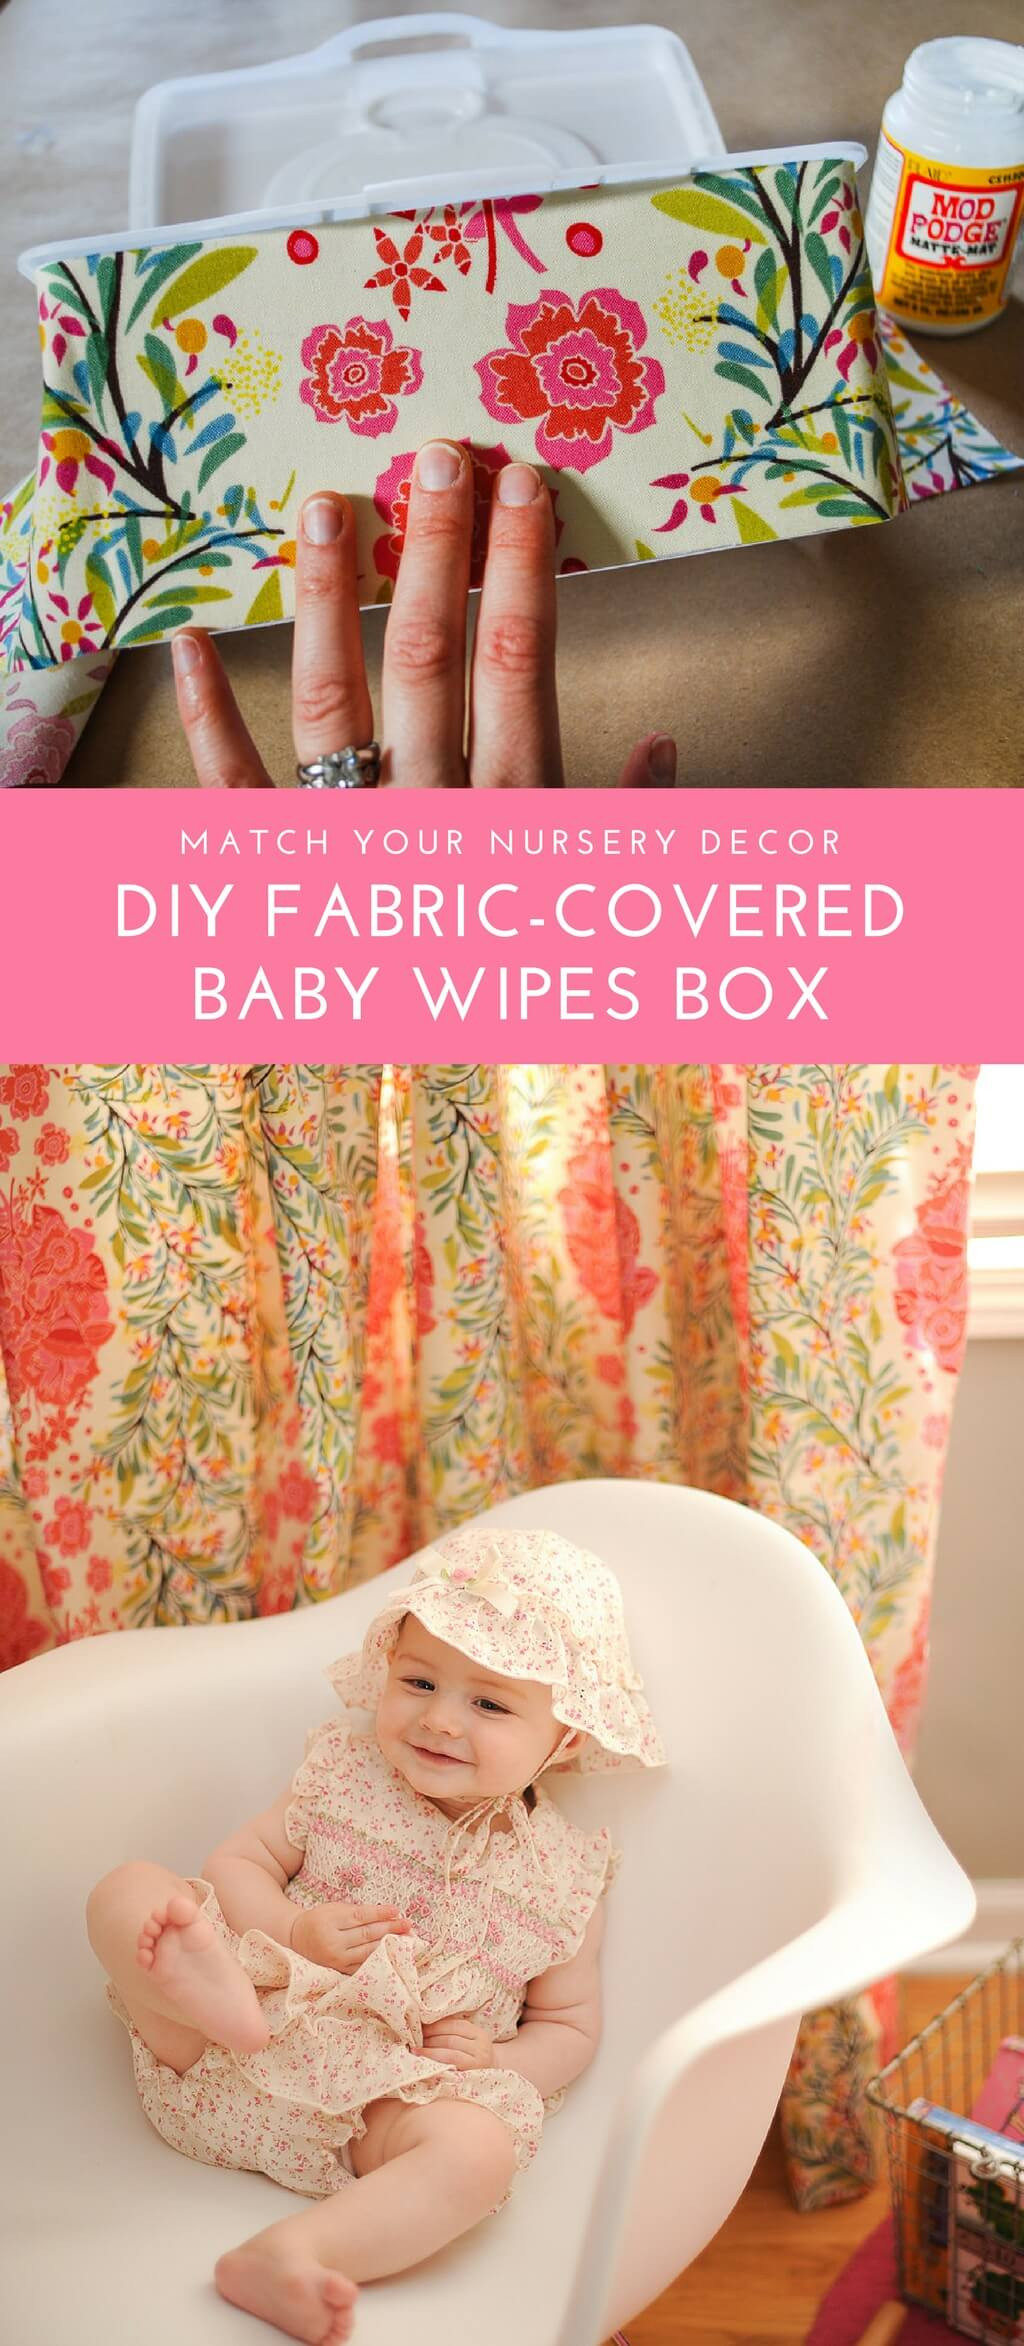 Cloth Baby Wipes DIY
 DIY Baby Wipes Container Craft to Match Nursery Decor